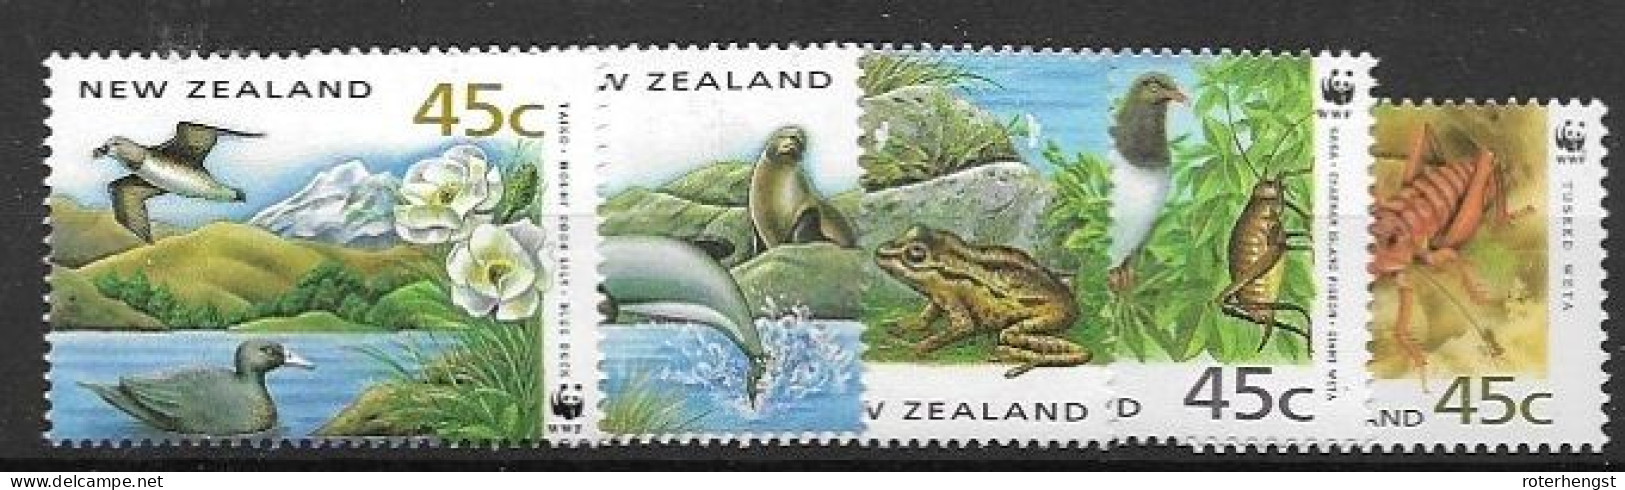 New Zealand Mnh ** Set 1993 WWF Animals Birds Set Frog Seal Insects - Nuevos